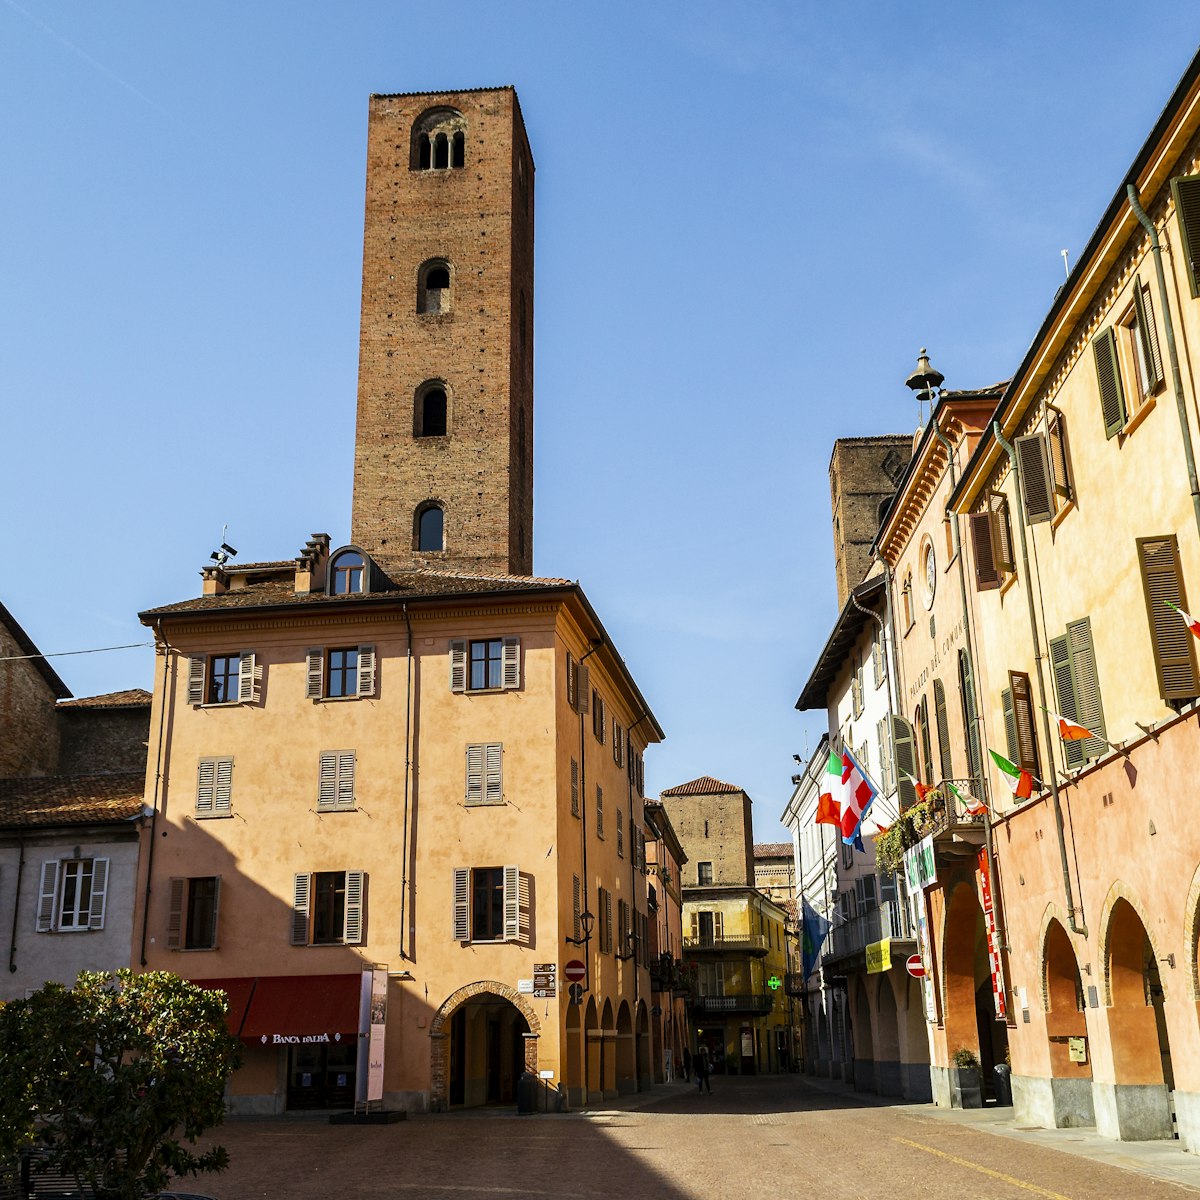 Alba, Cuneo, Piedmont, Italy  - February 20, 2019: View of Piazza Duomo in the historic center of the famous city of the Langhe.
1224882161
mediterranean cuisine, gastronomic excellence, fine wine, editorial, piazza duomo